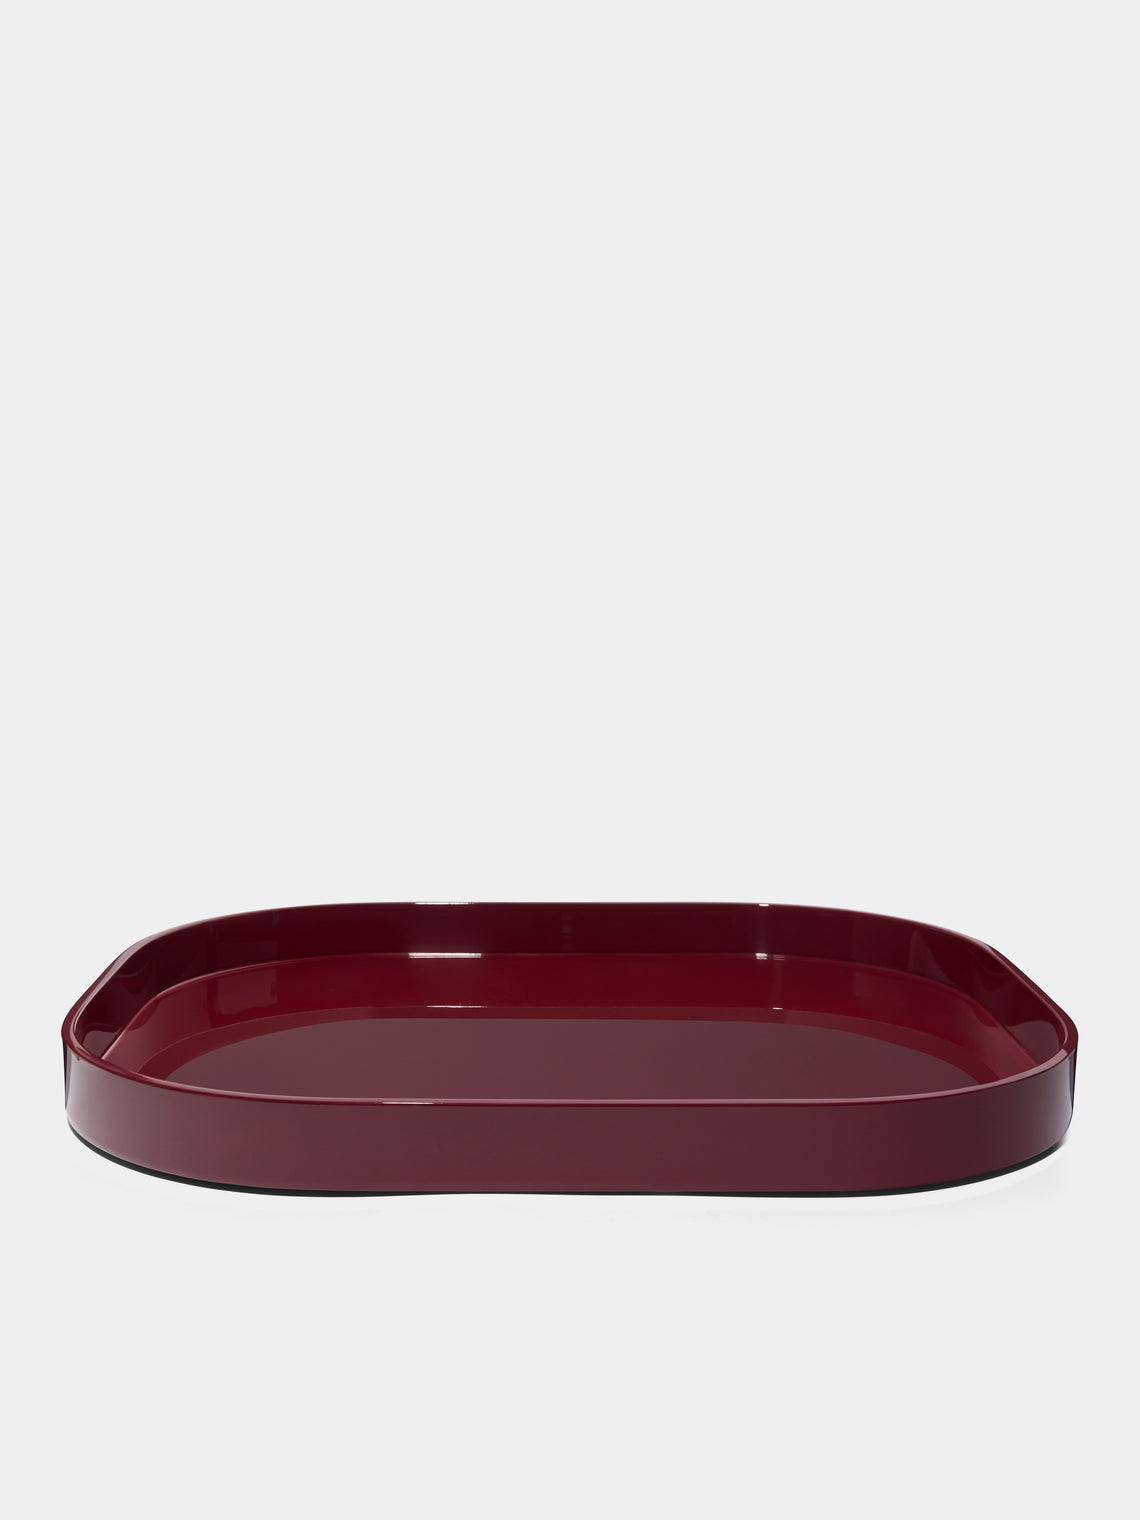 The Lacquer Company - Lacquered Large Stacking Tray - Burgundy - ABASK